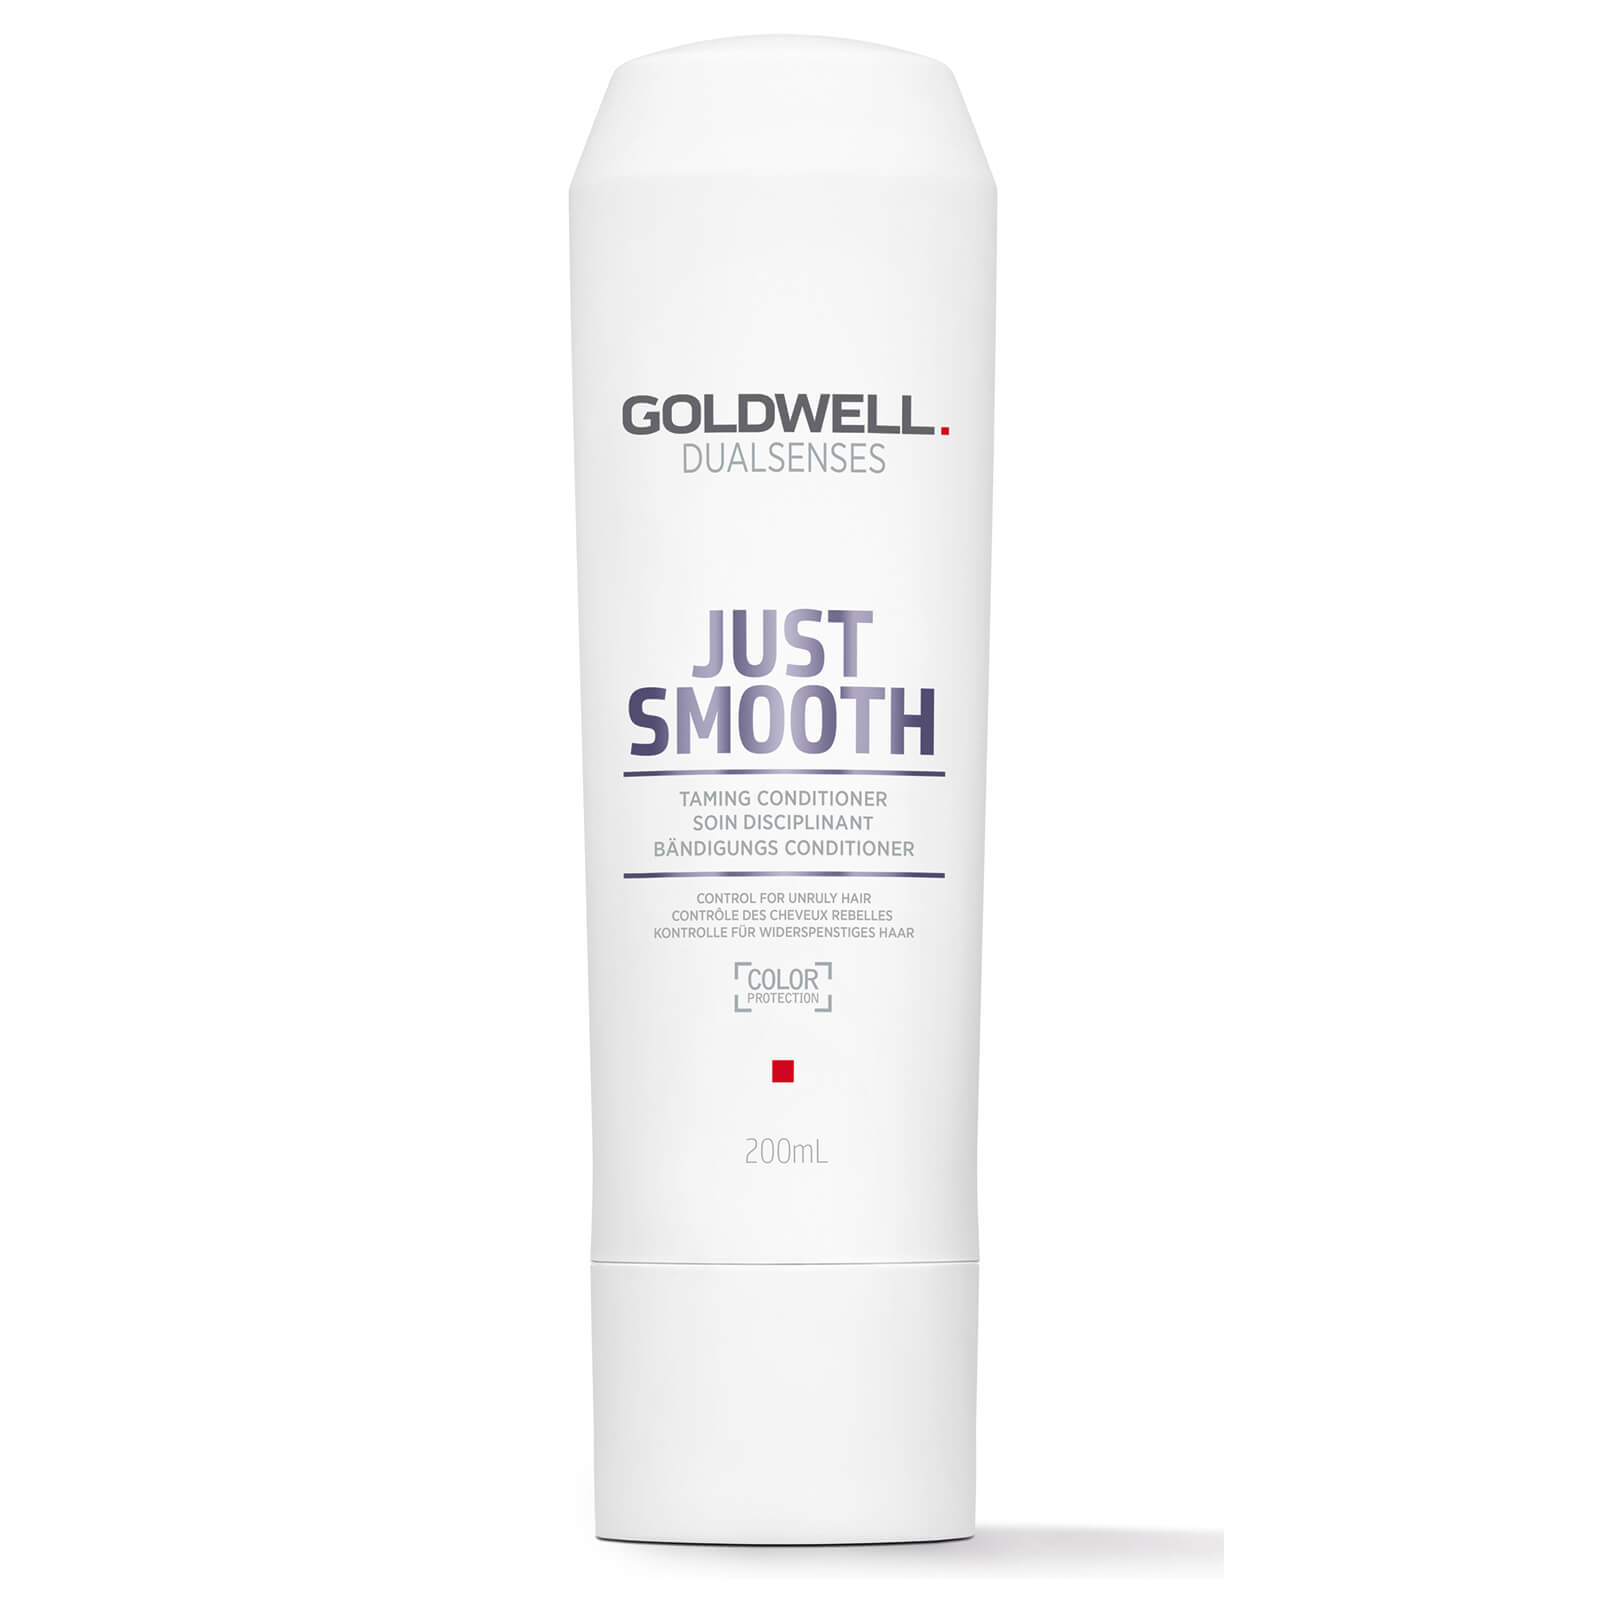 Goldwell Just Smooth Taming Conditioner 200ml